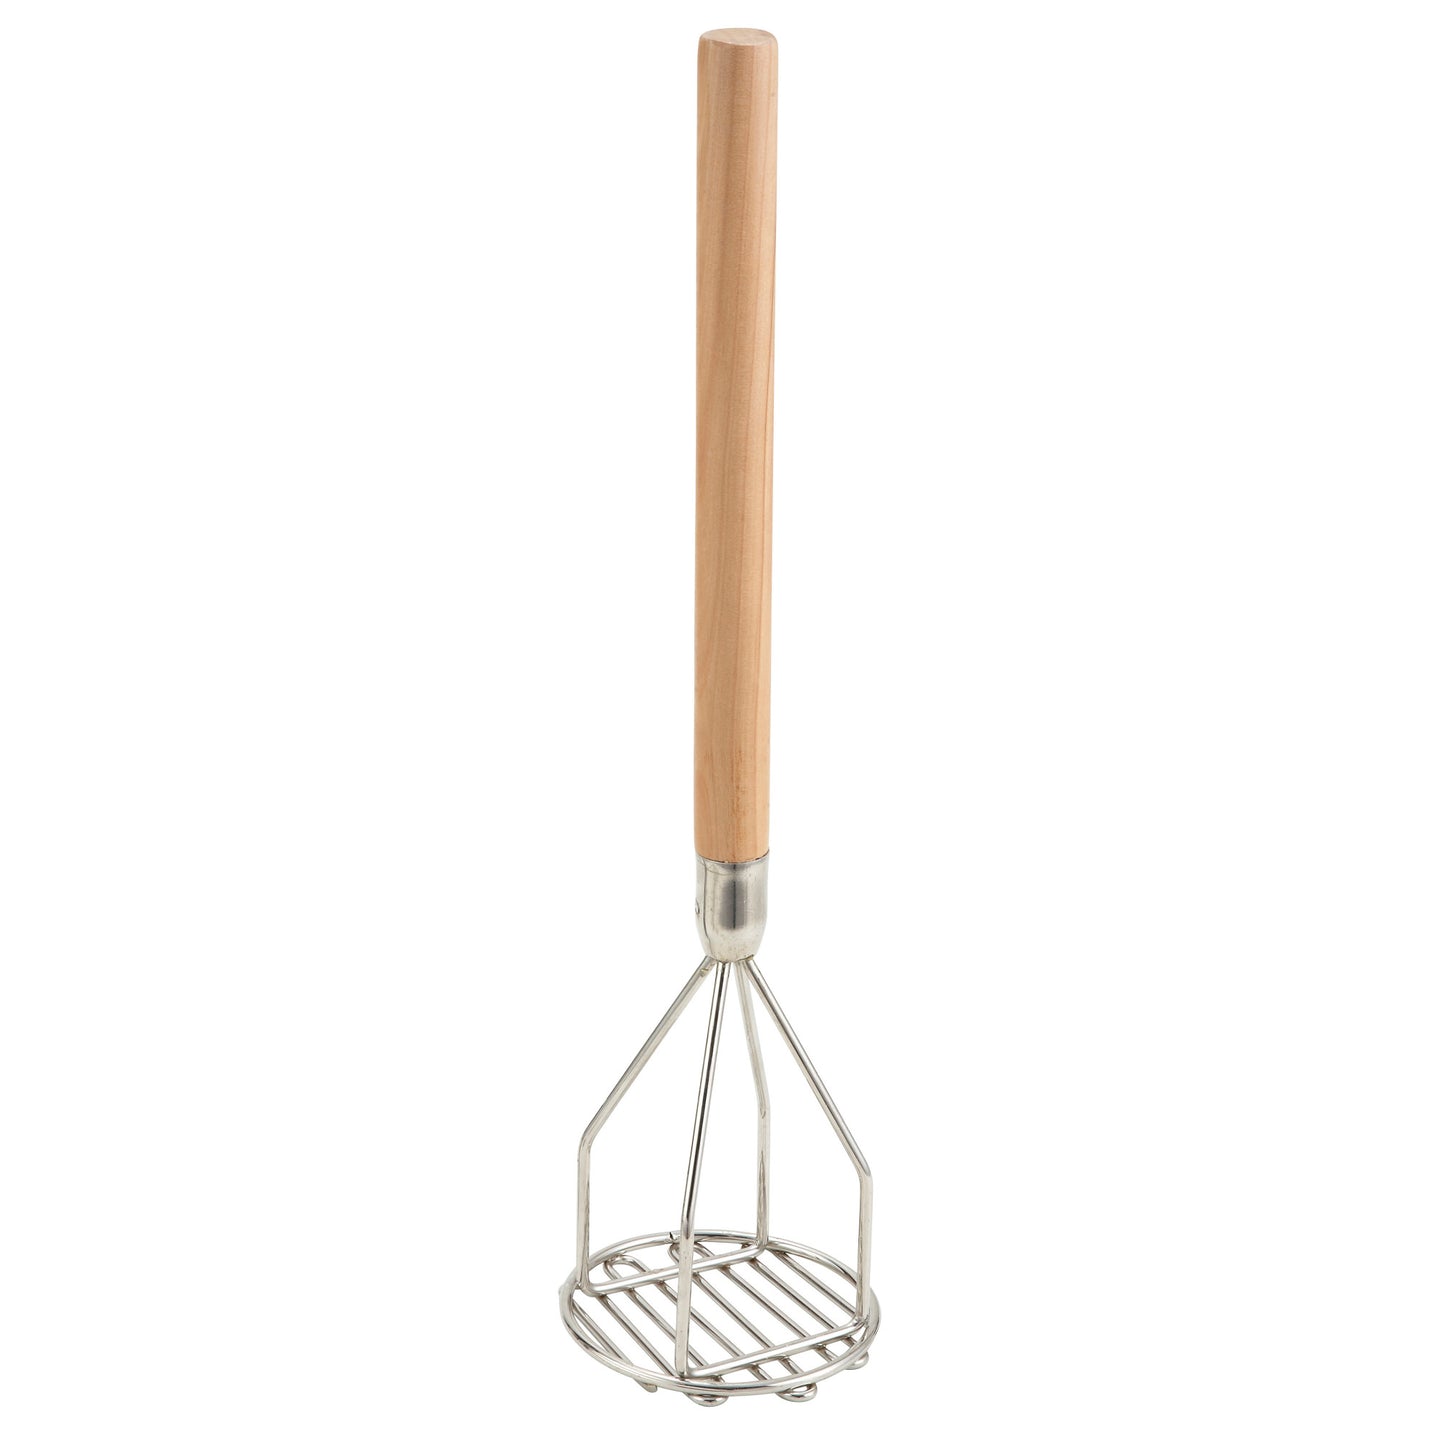 Potato Masher with Wooden Handle - 4" Round